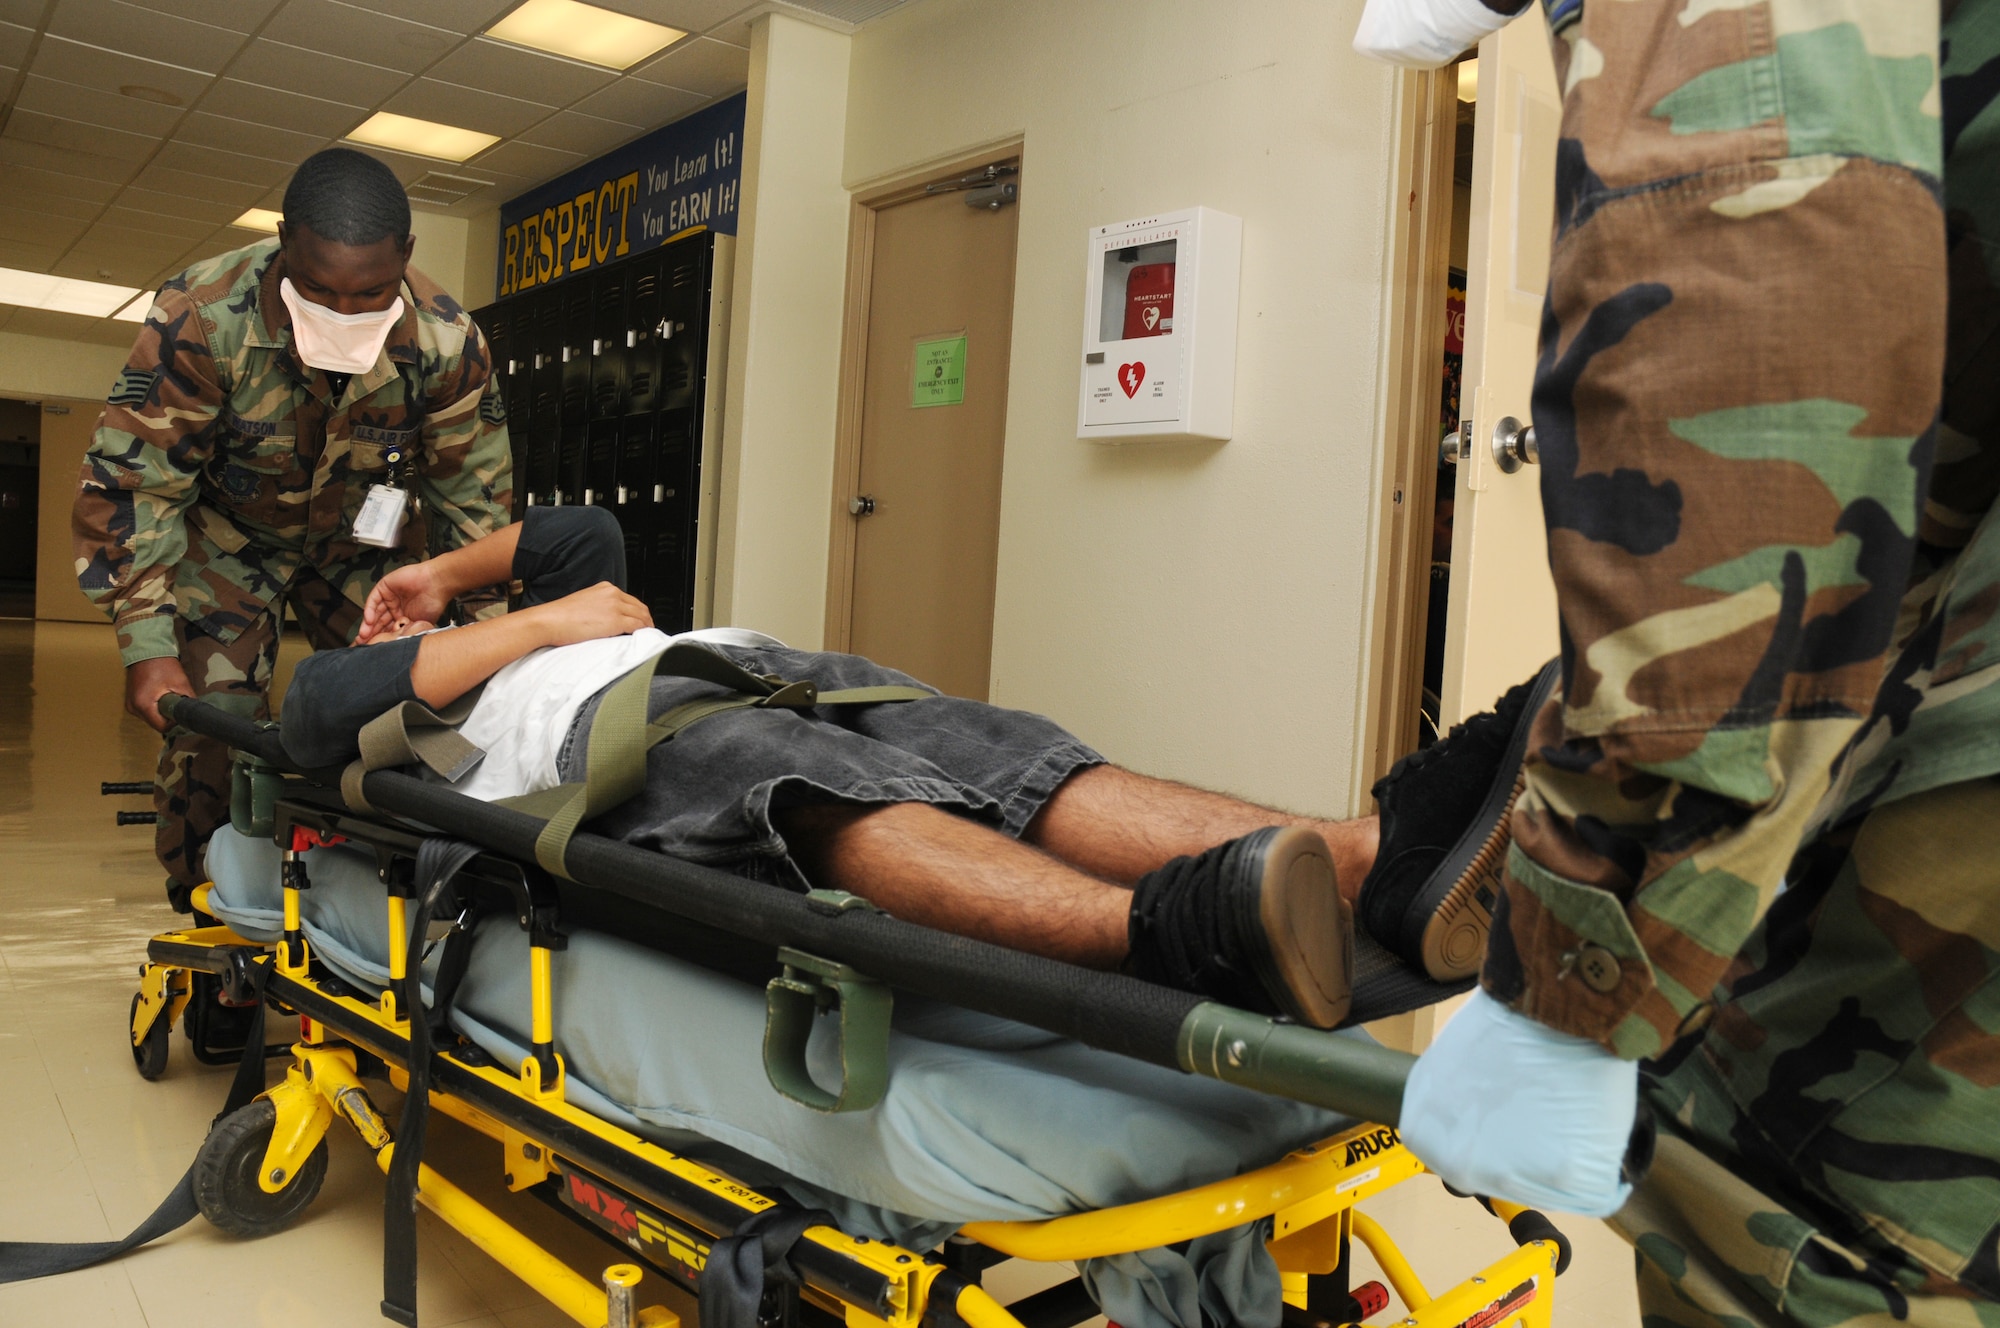 Airmen from the 18th Medical Group lift a Kadena High School student onto a stretcher following a simulated contamination of the high school's food supply during a Local Operational Readiness Exercise at Kadena Air Base, Japan  Dec. 02, 2008. The simulation is part of a Local Operational Readiness Exercise meant to test the operational readiness of Kadena Airmen. 
(U.S. Air Force photo/Airman 1st Class Chad Warren)